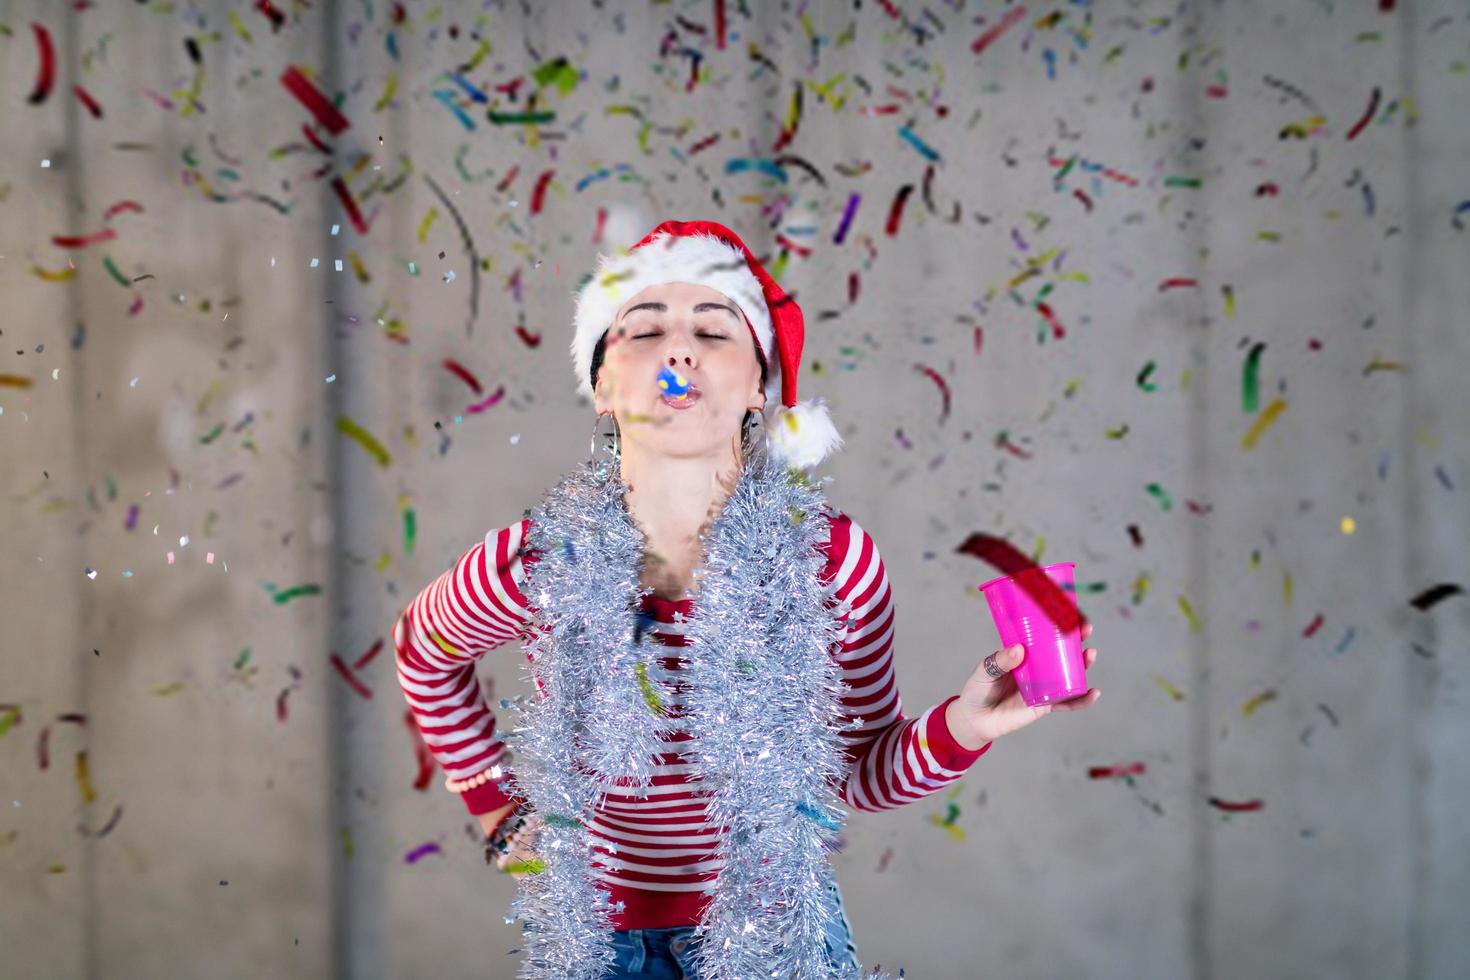 business woman wearing a red hat and blowing party whistle photo